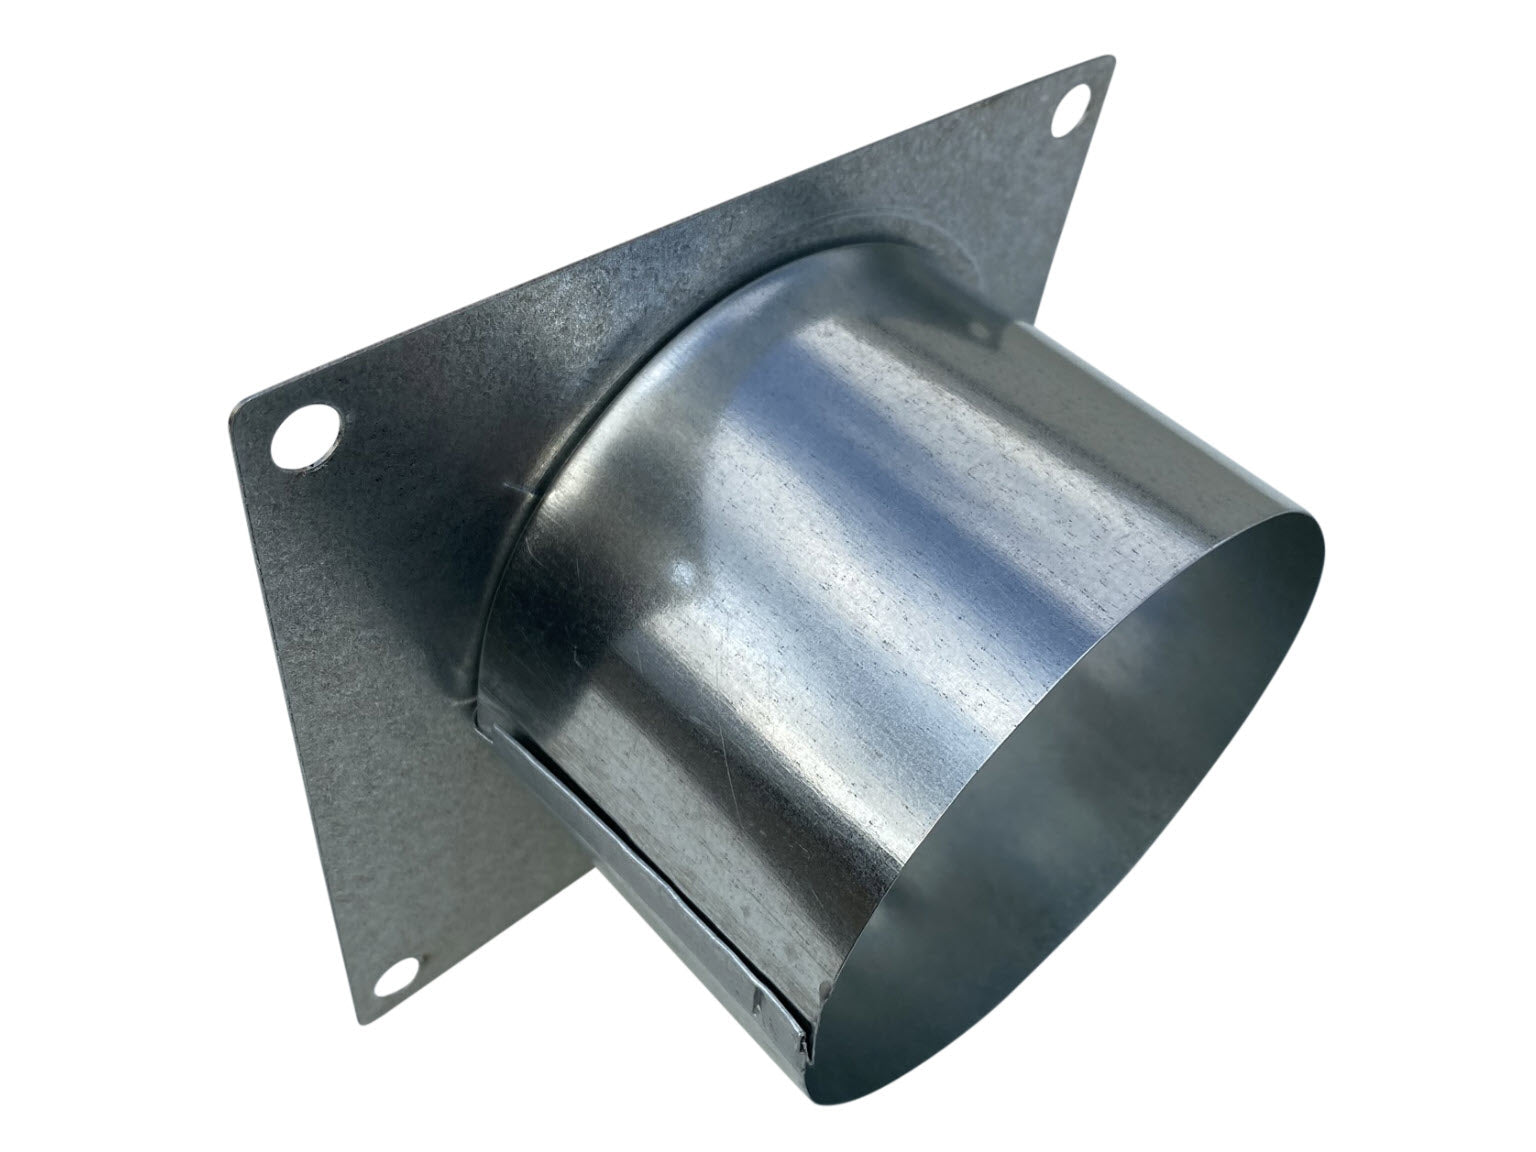 Flange Adapter For Fasco B45227 By Vent Works